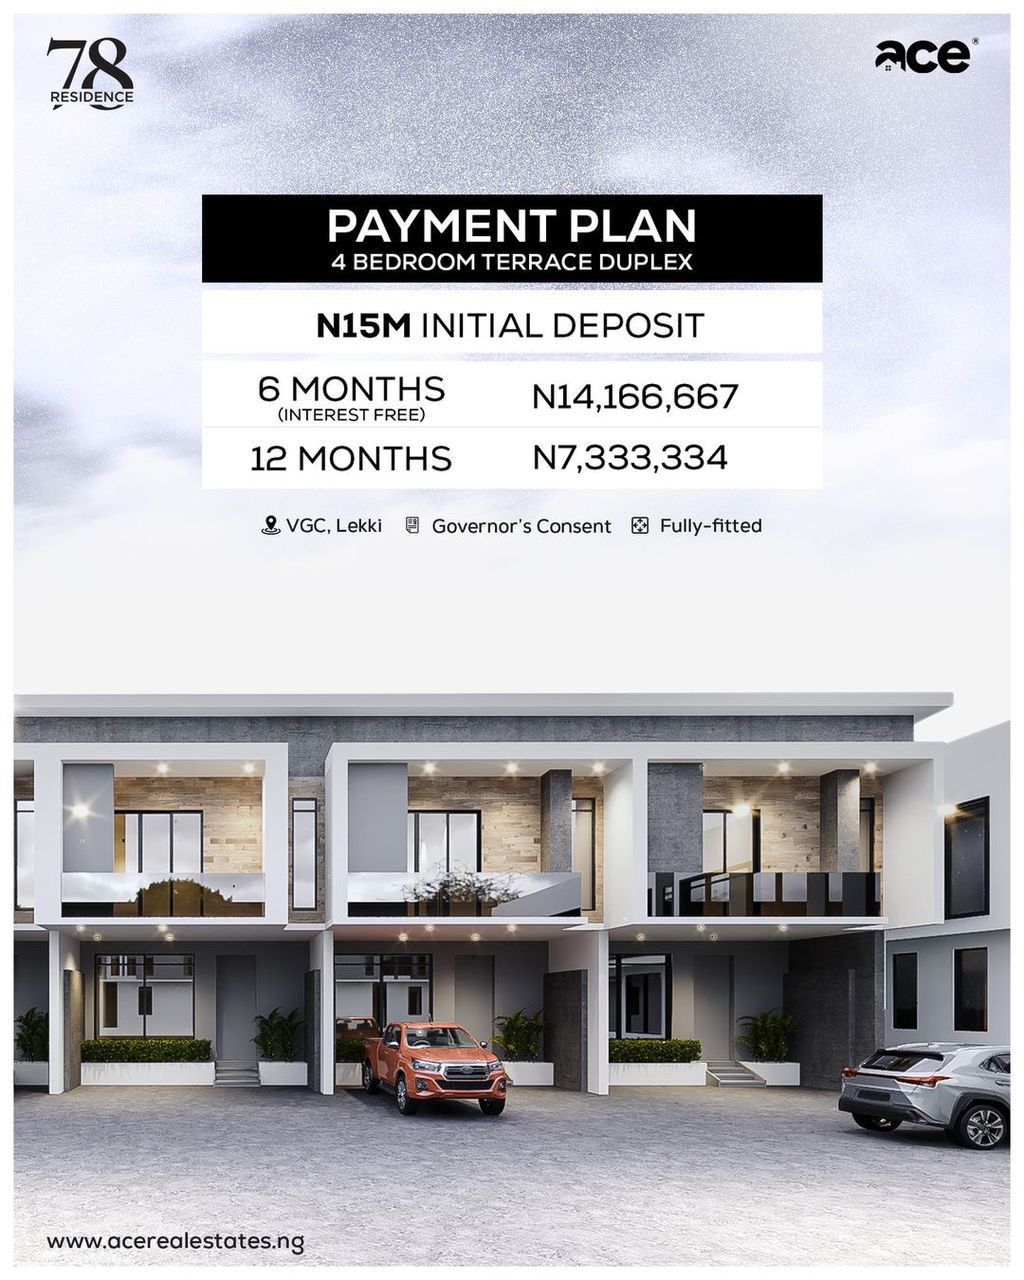 78 Residence, the most stunning residential development in VGC Lekki, now officially on the market. Choose any of our 4-bedroom terraces or Semi-detached units as your next home.